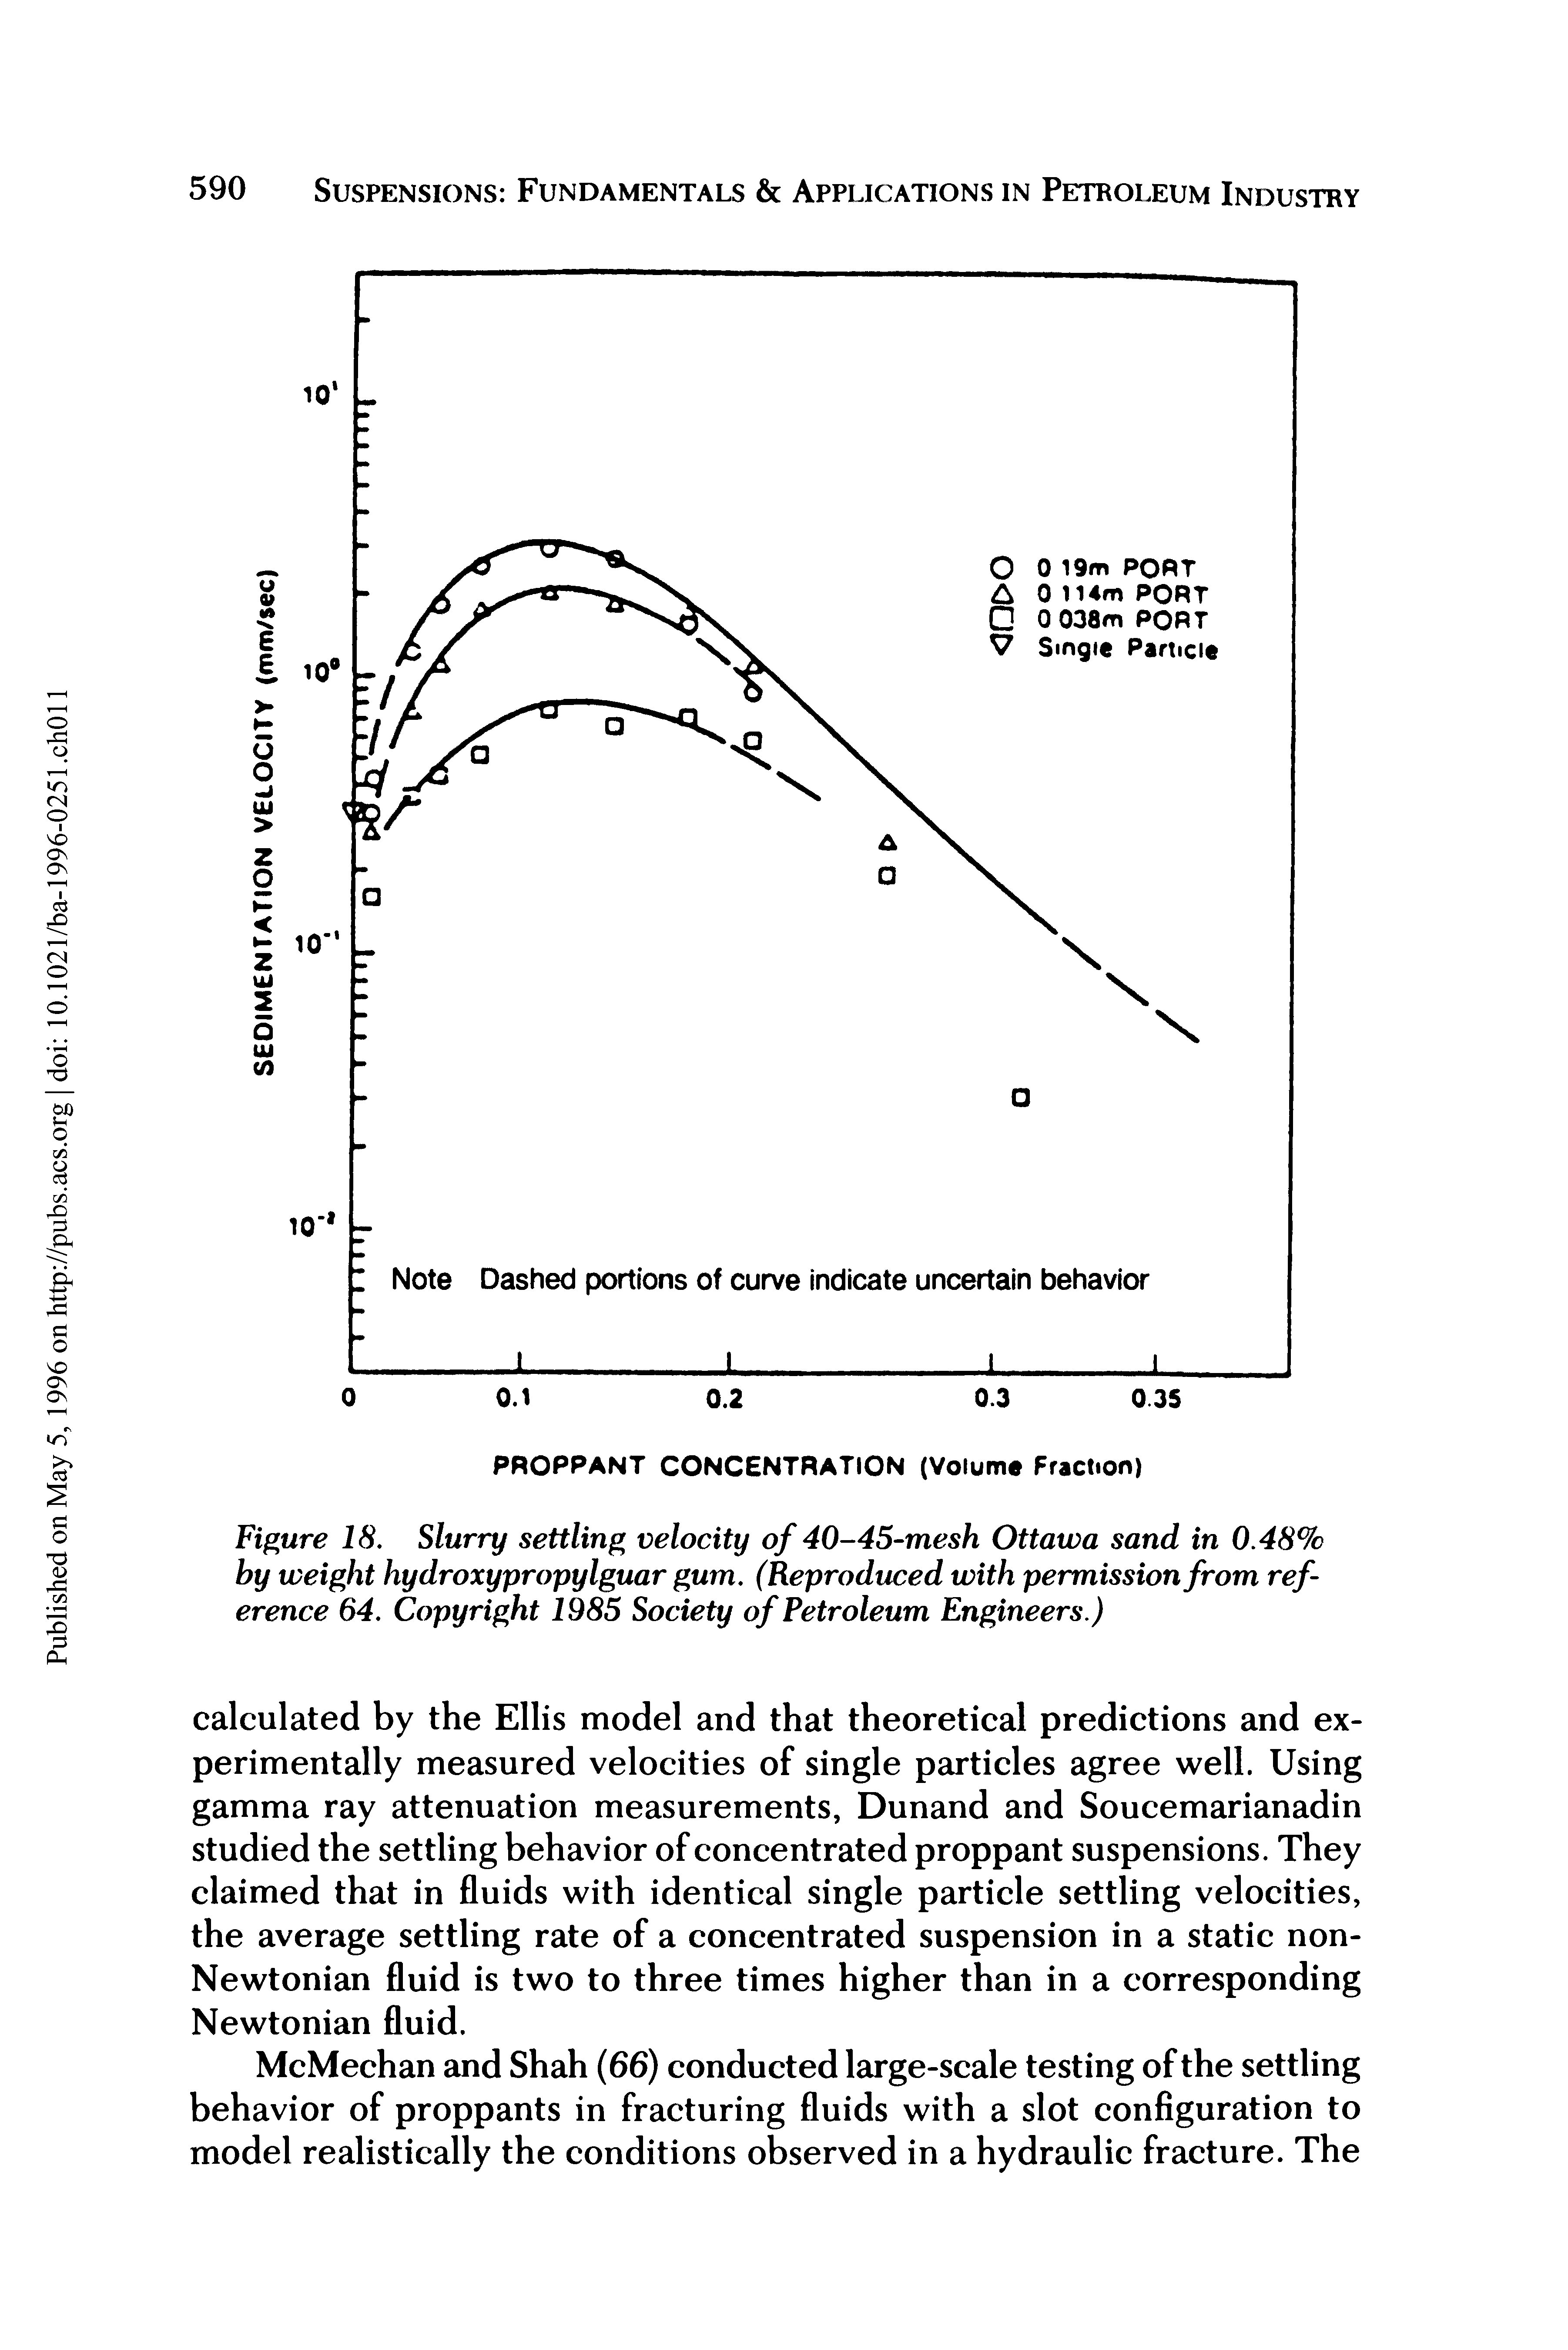 Figure 18. Slurry settling velocity of 40-45-mesh Ottawa sand in 0.48% by weight hydroxypropylguar gum. (Reproduced with permission from reference 64. Copyright 1985 Society of Petroleum Engineers.)...